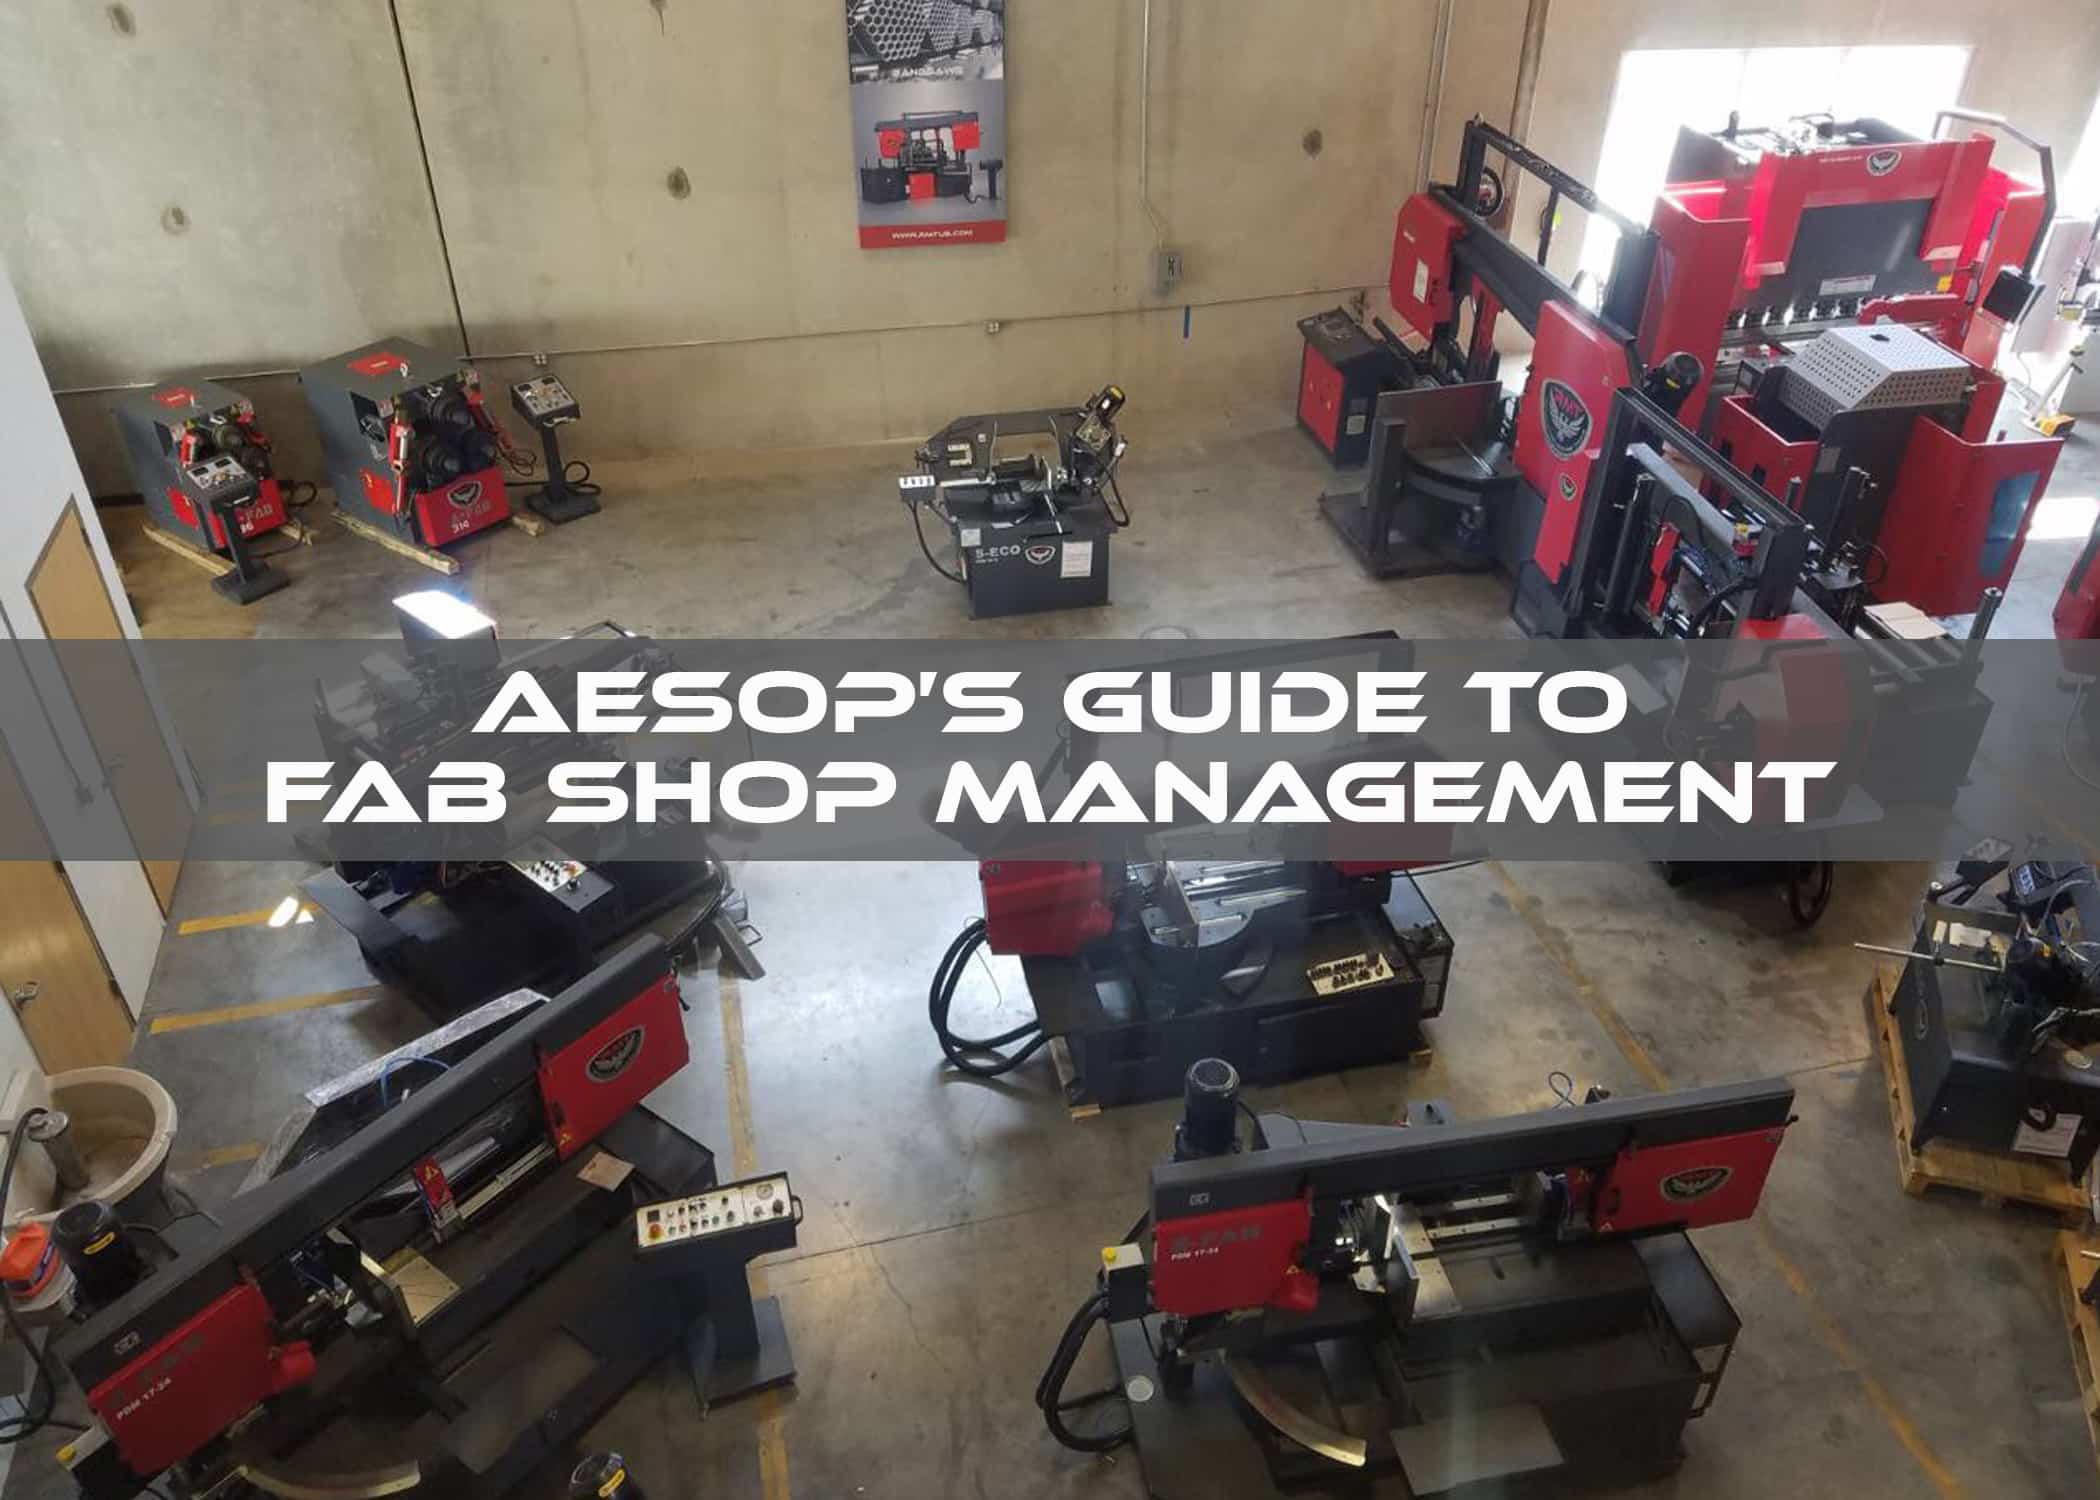 Aesop's Guide to Fab Shop ManagementFeatured